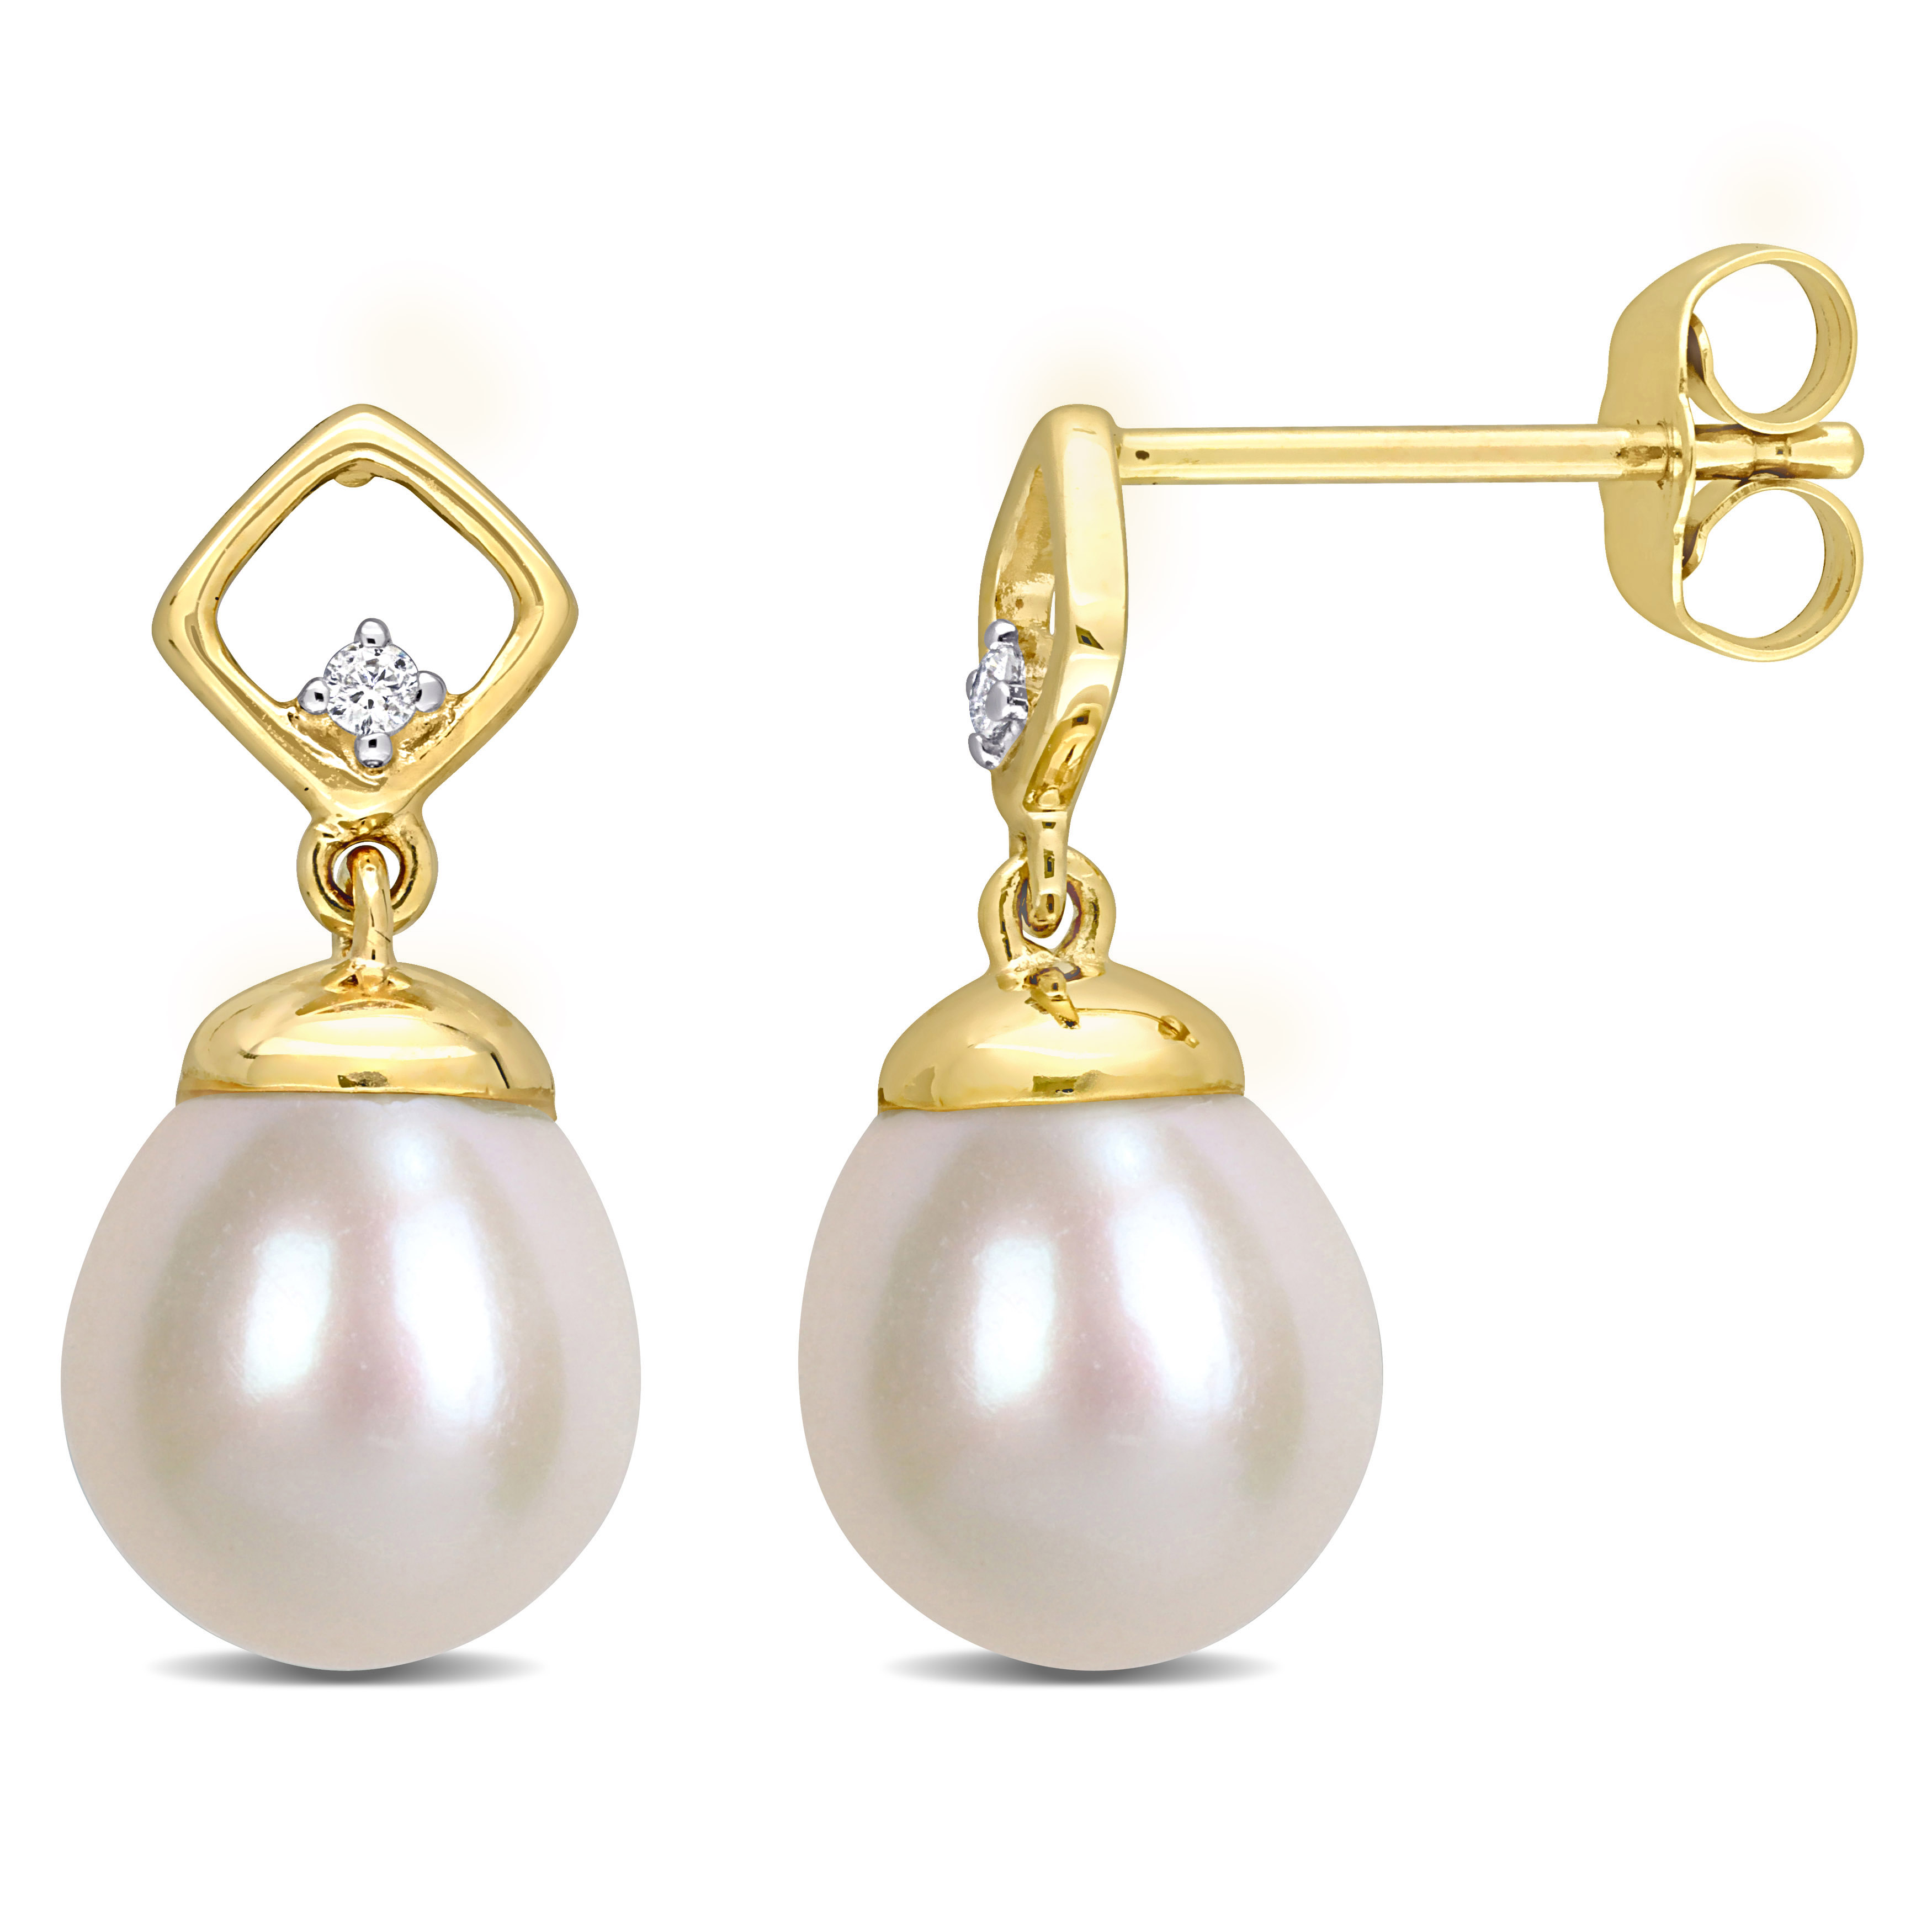 8 - 8.5 MM Freshwater Cultured Pearl and Diamond Accent Earrings in 14k Yellow Gold